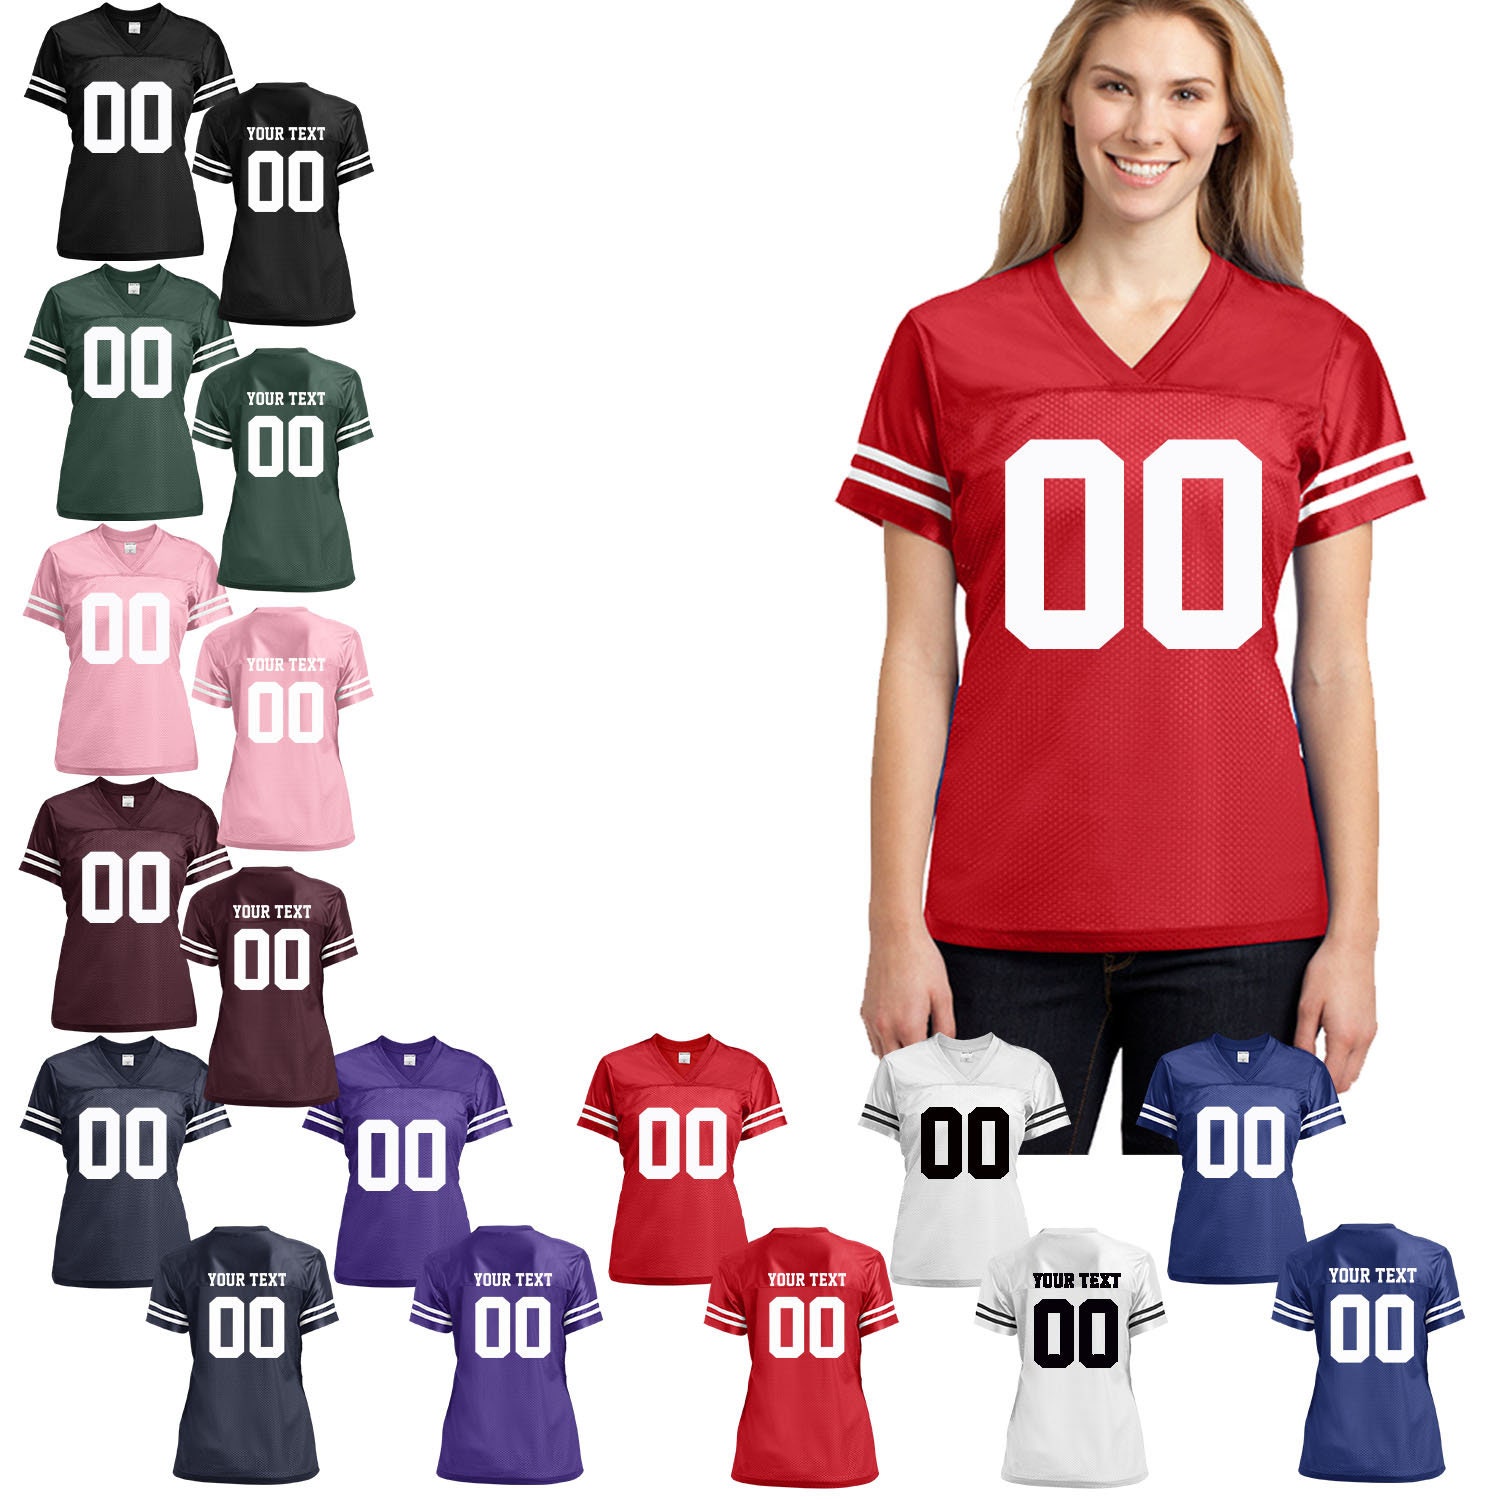  Blank Football Jerseys for Men,Plain Practice Sports Uniform  Tops Youth Athletic Shirt Women White Black Red Pink Navy S-4XL : Clothing